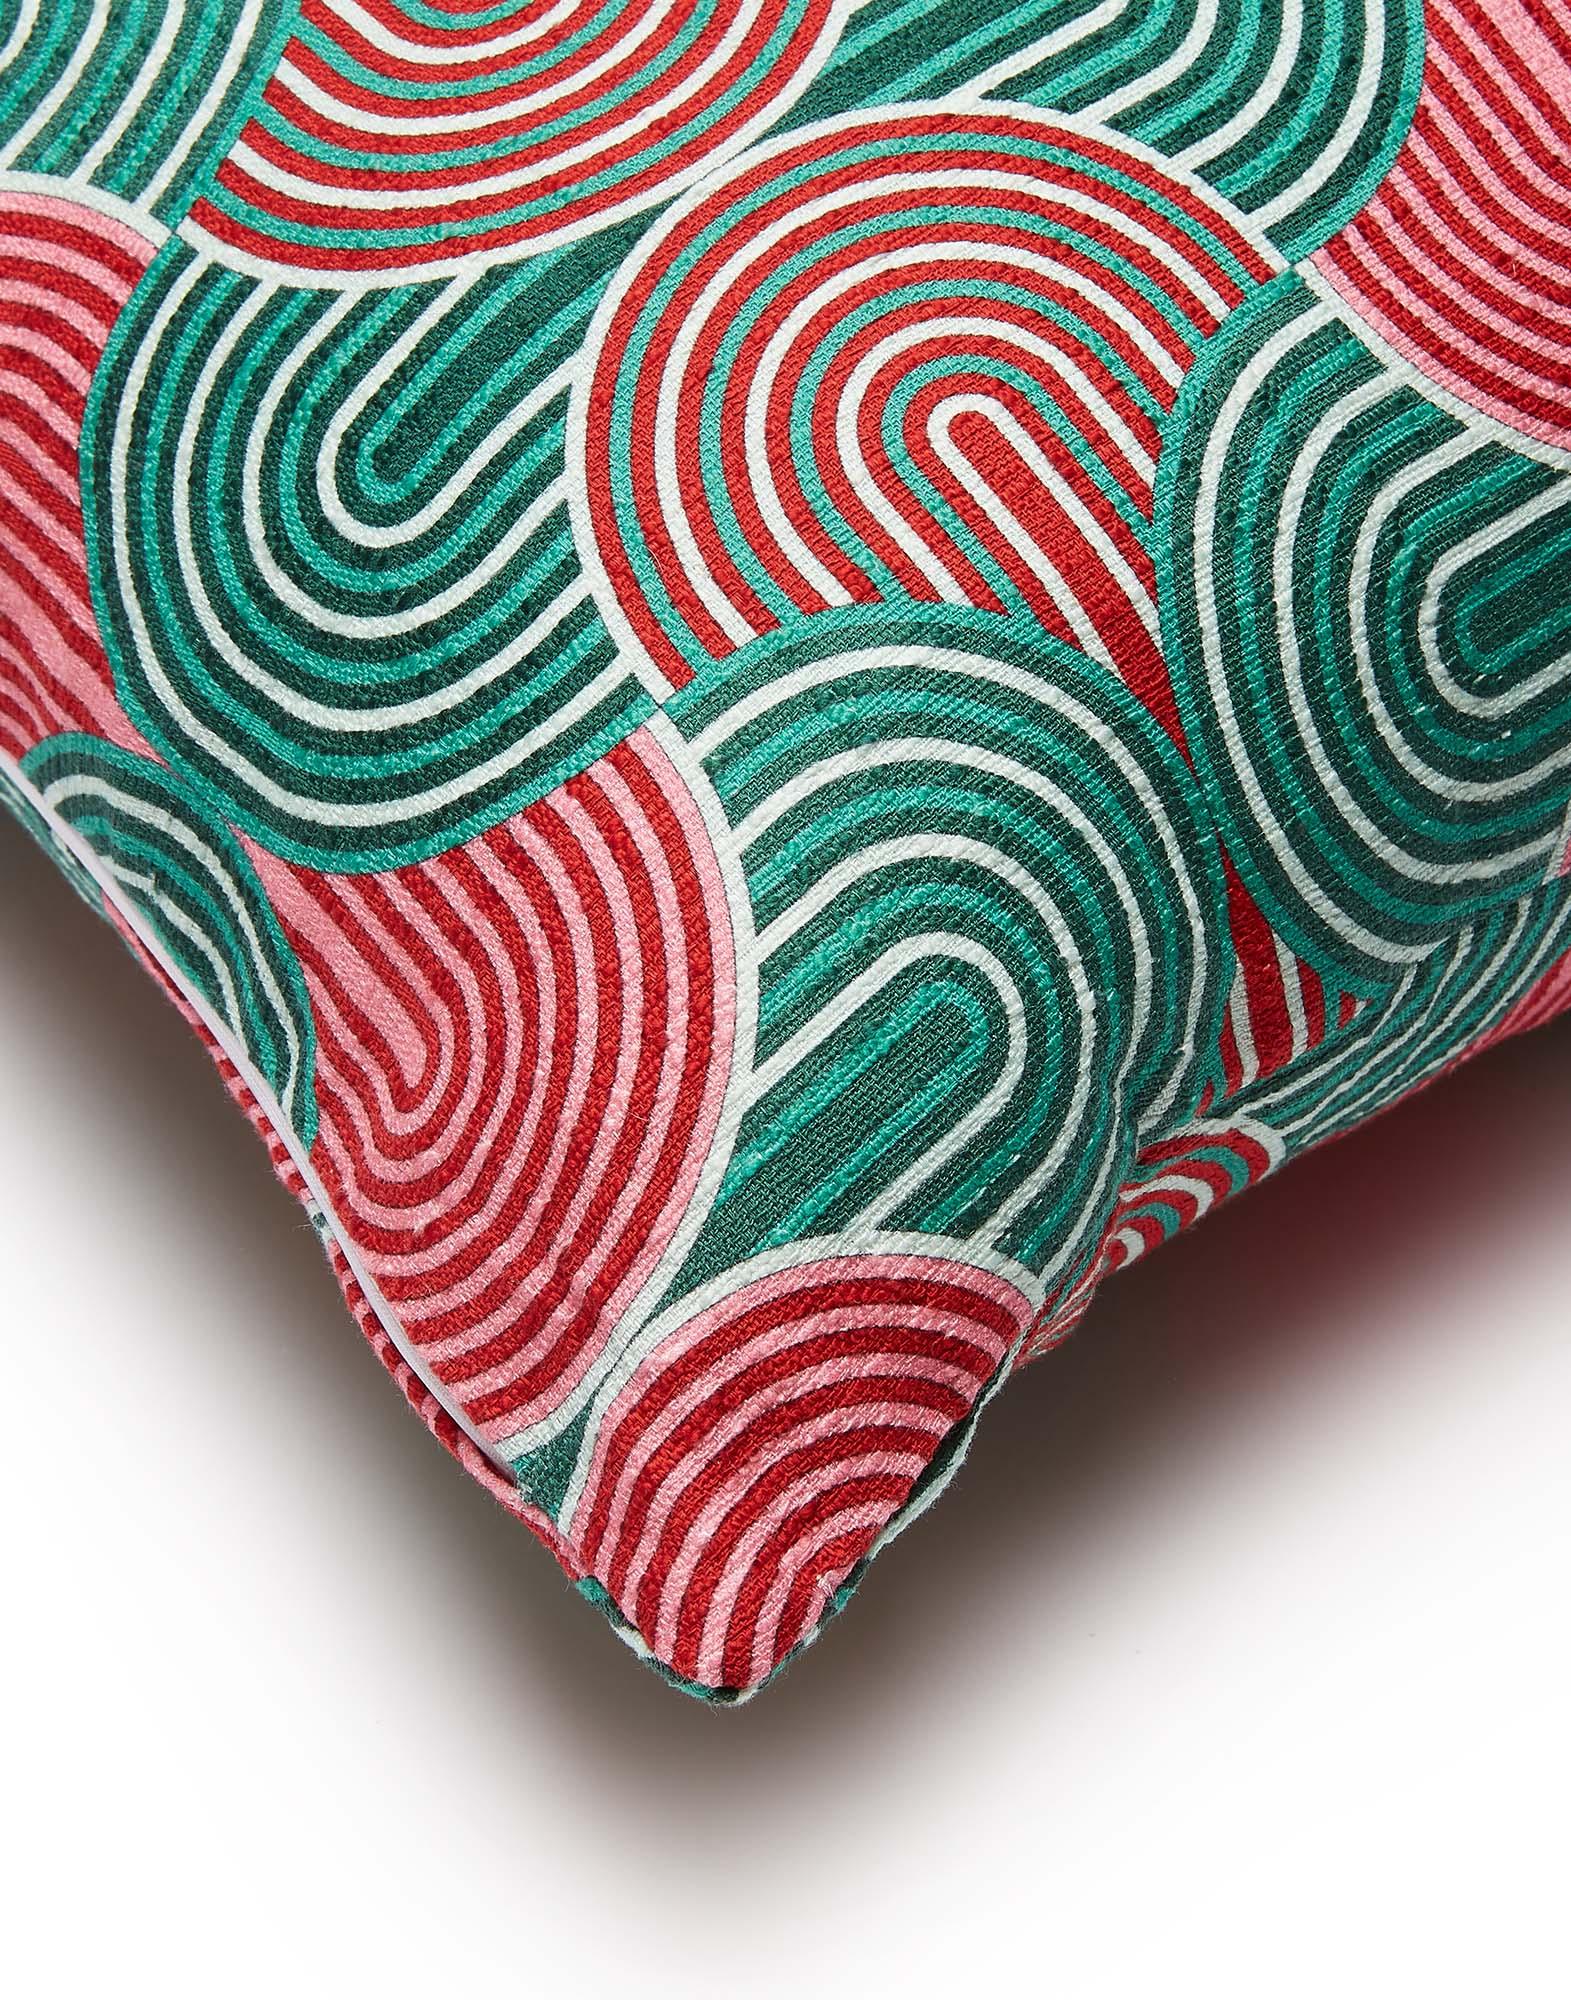 A happy home equals a happy heart, so these print-punching pillows are simply good math. Crafted from our vibrant shot cotton with a linen feel, our square cushions come in our most vibration-raising prints and are designed to be easily mixed and